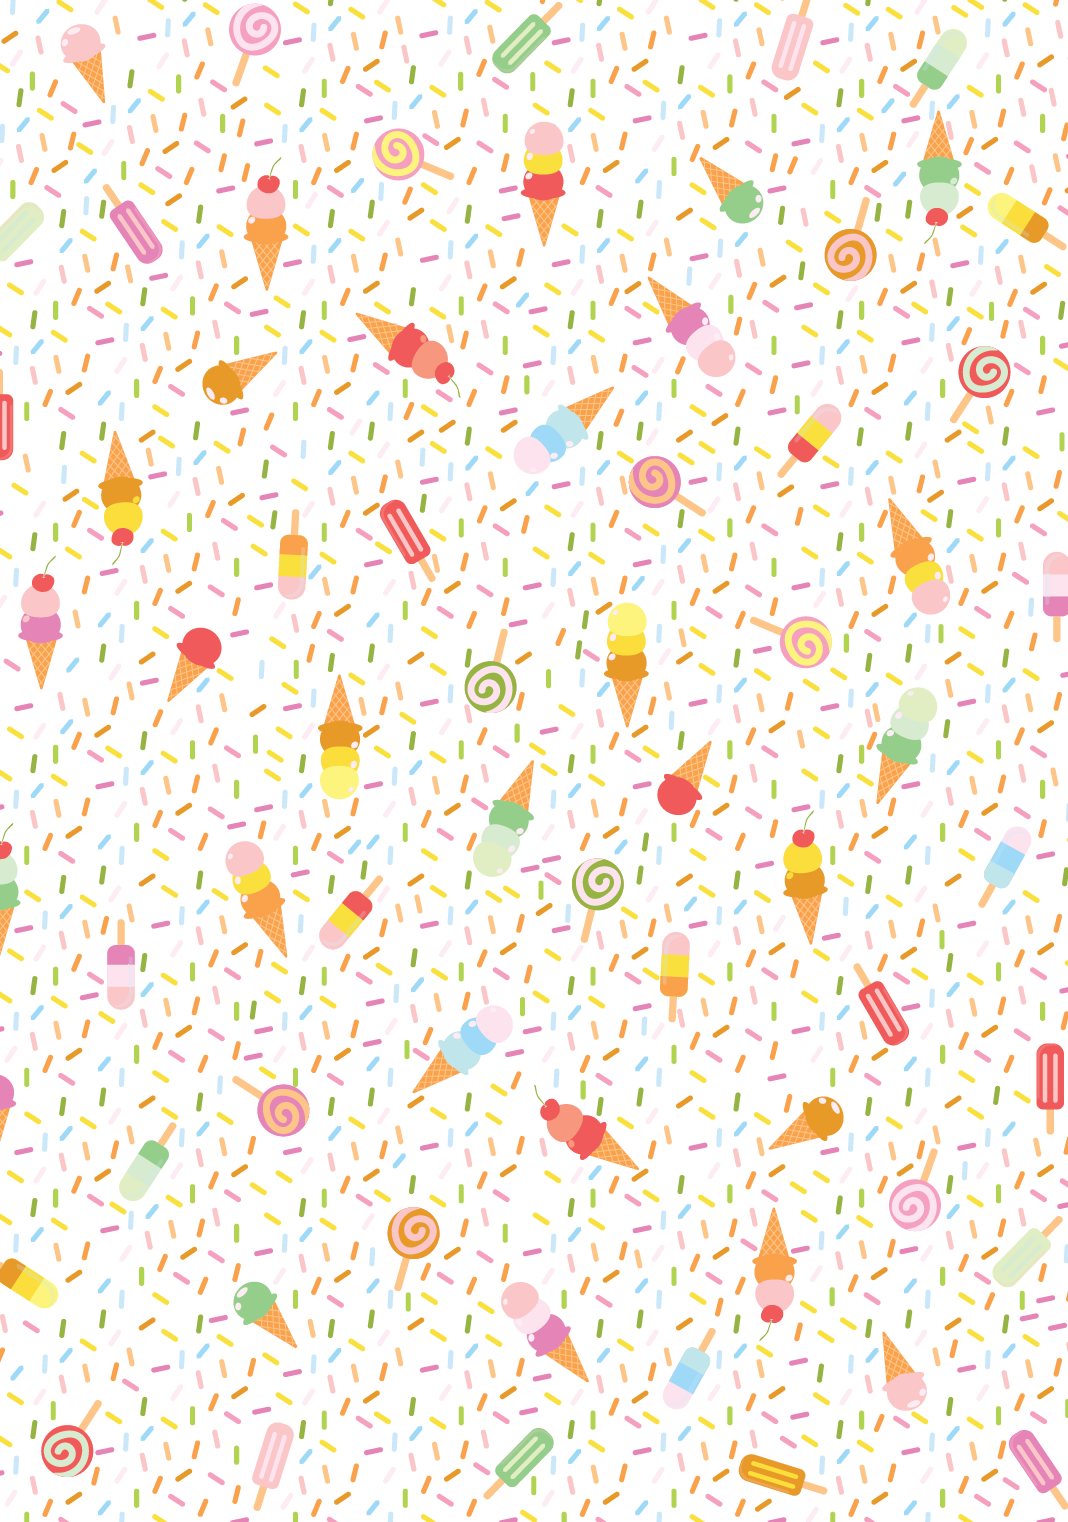 Ice Cream and Lolly Wrapping Paper with FREE GIFT TAG